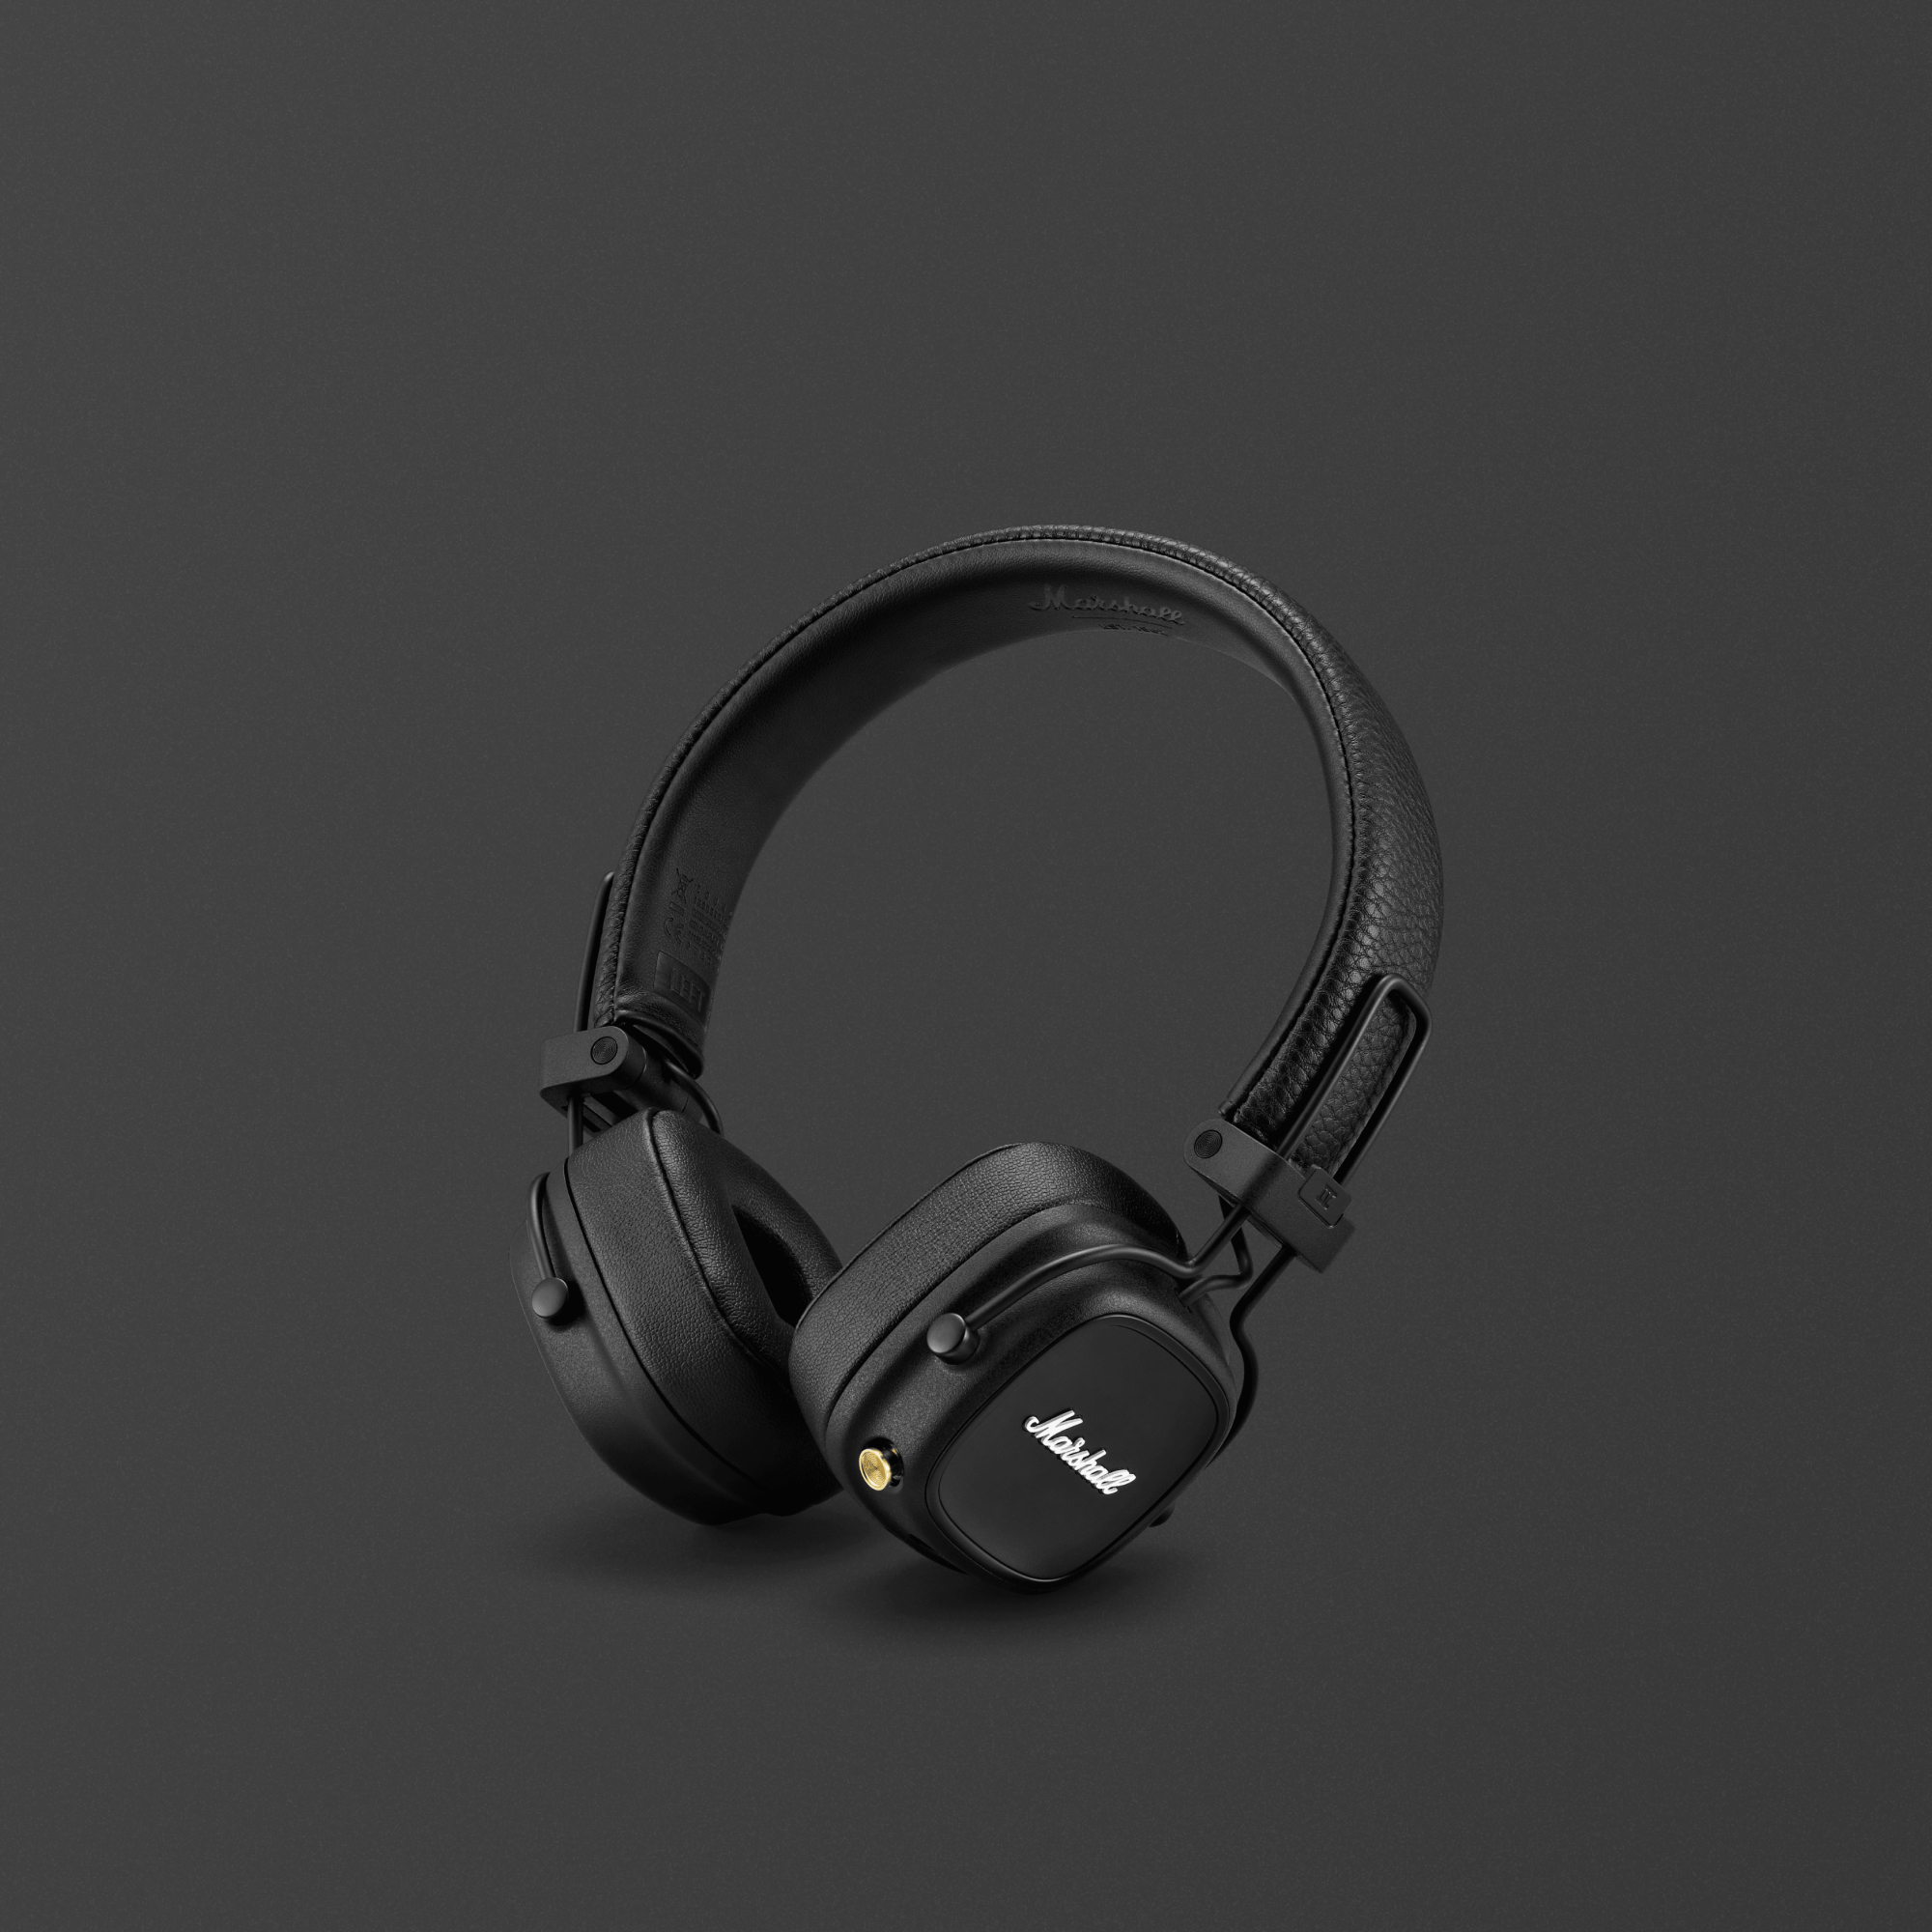 Major IV wireless headphones deliver unmatched sound quality 